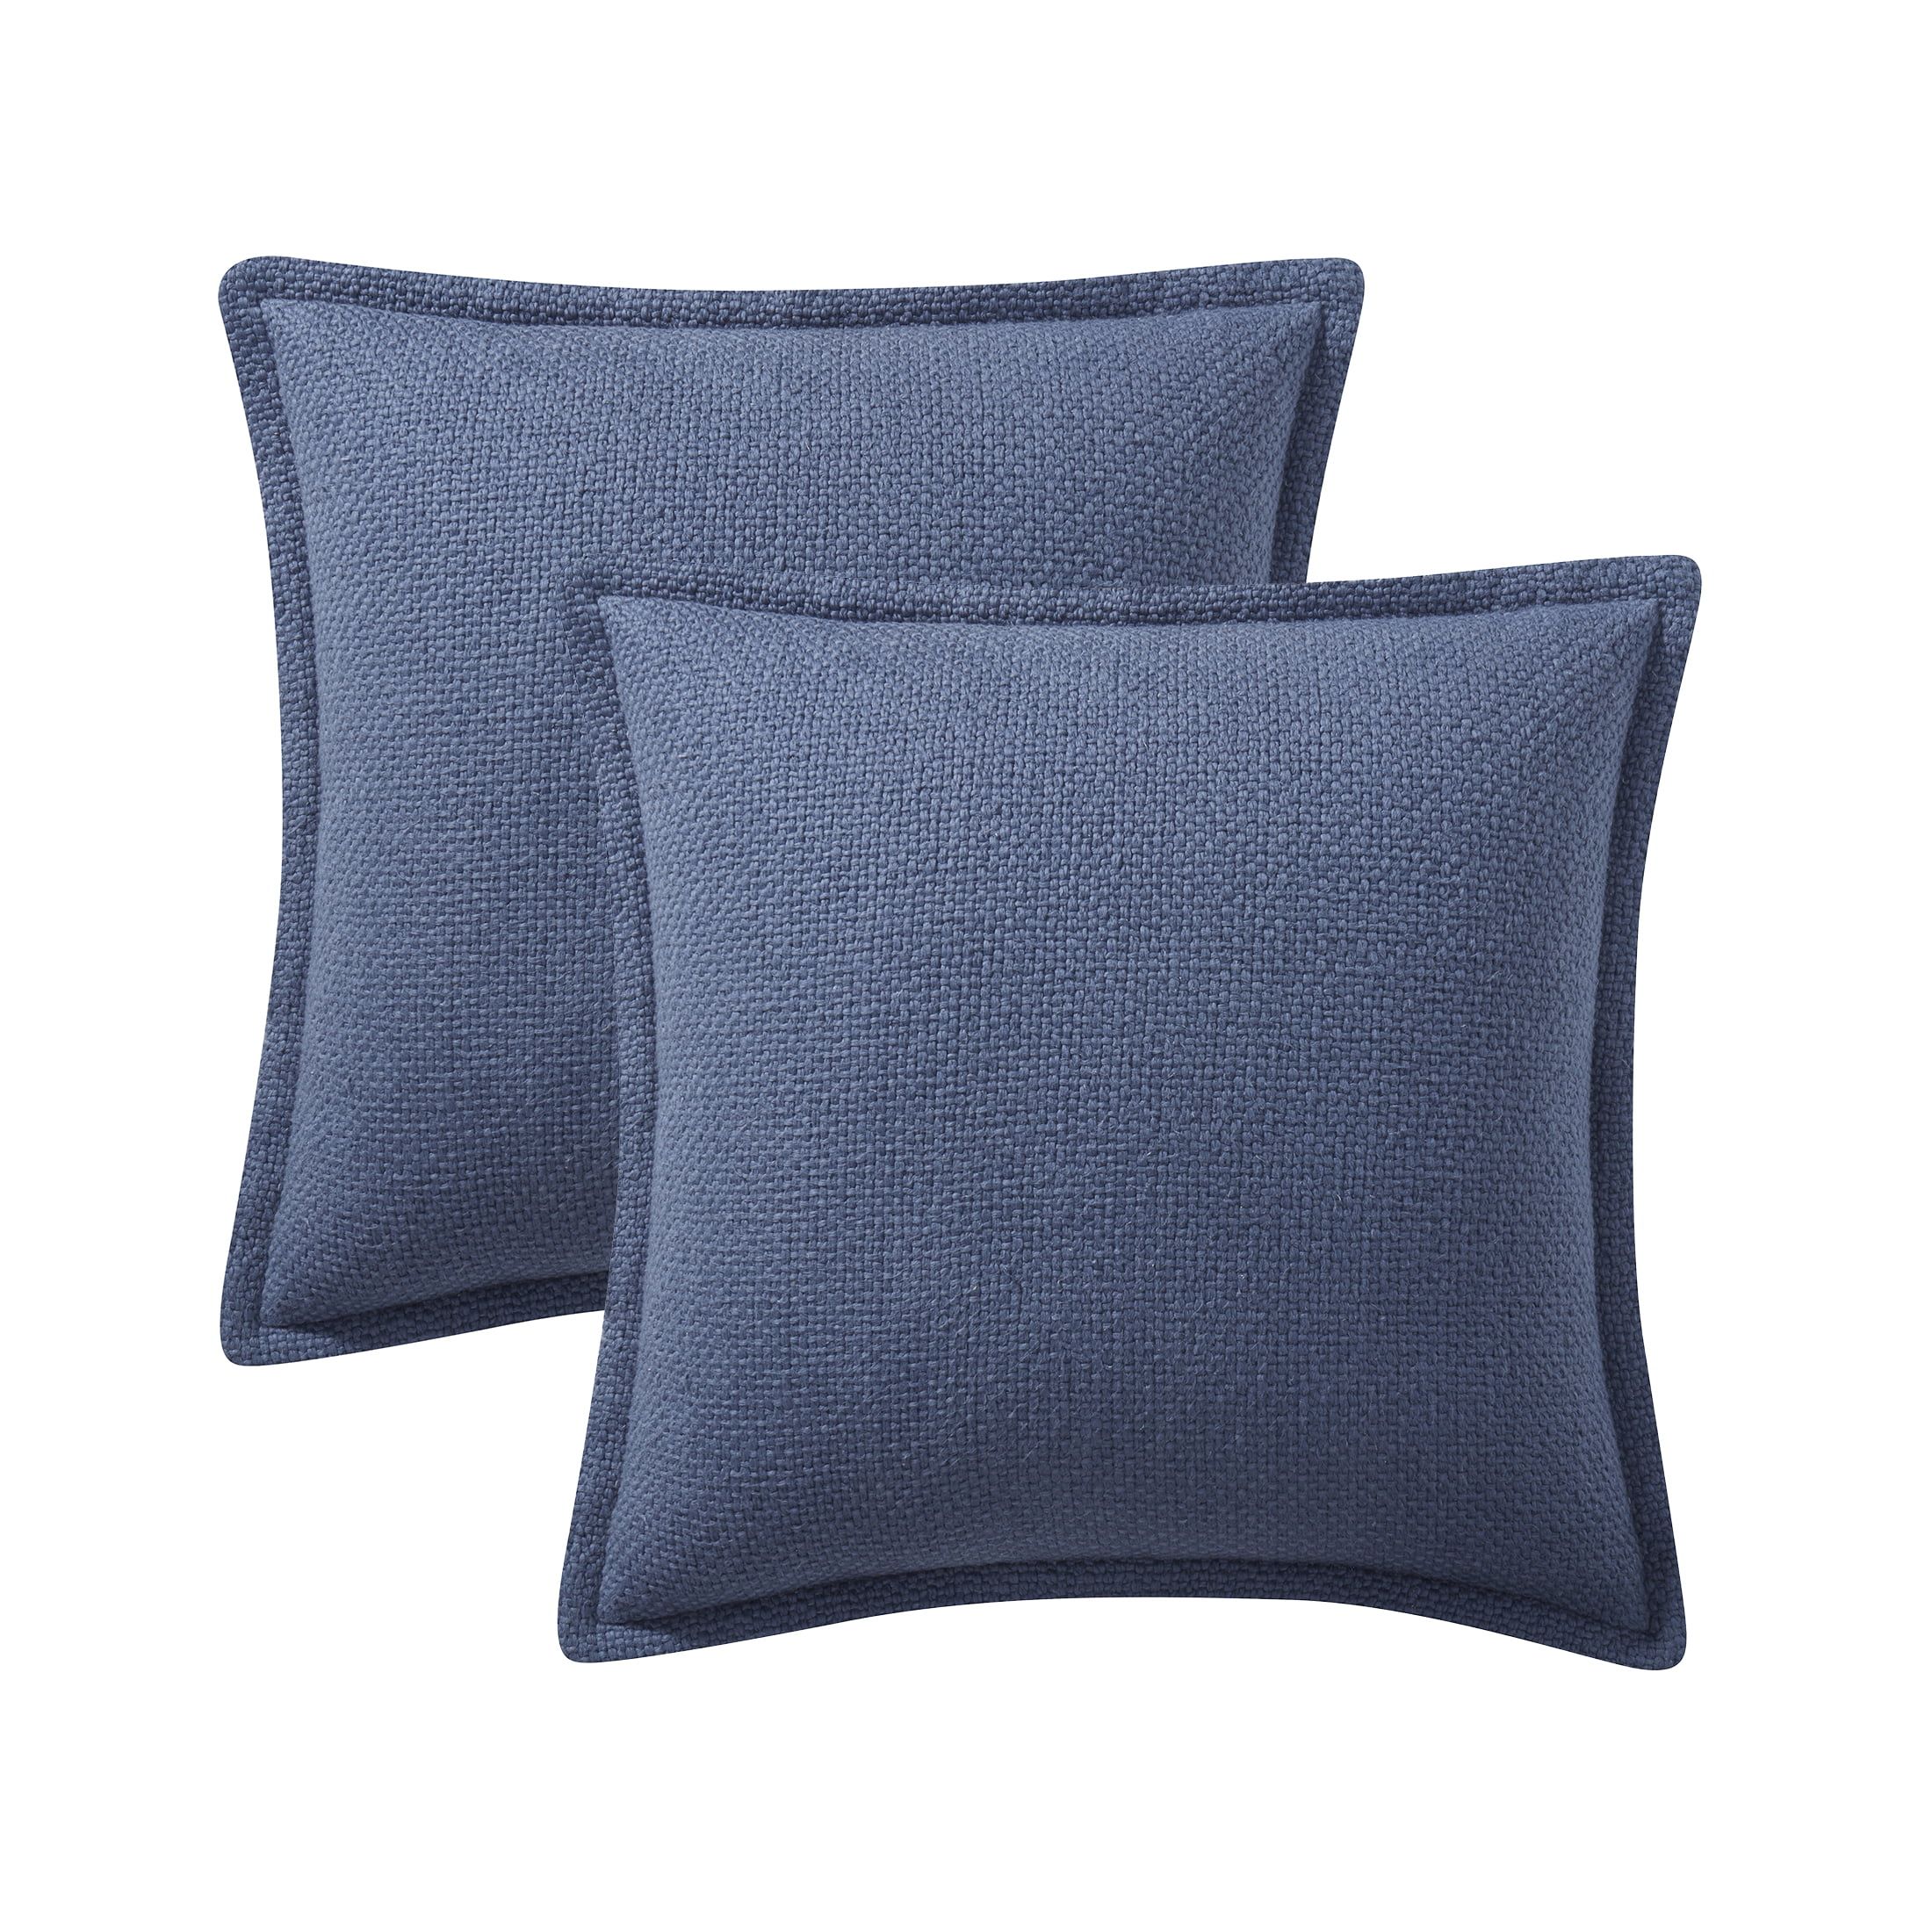 My Texas House 20" x 20" Allie Reversible Solid Blue Cotton Decorative Pillow Covers (2 Count) | Walmart (US)